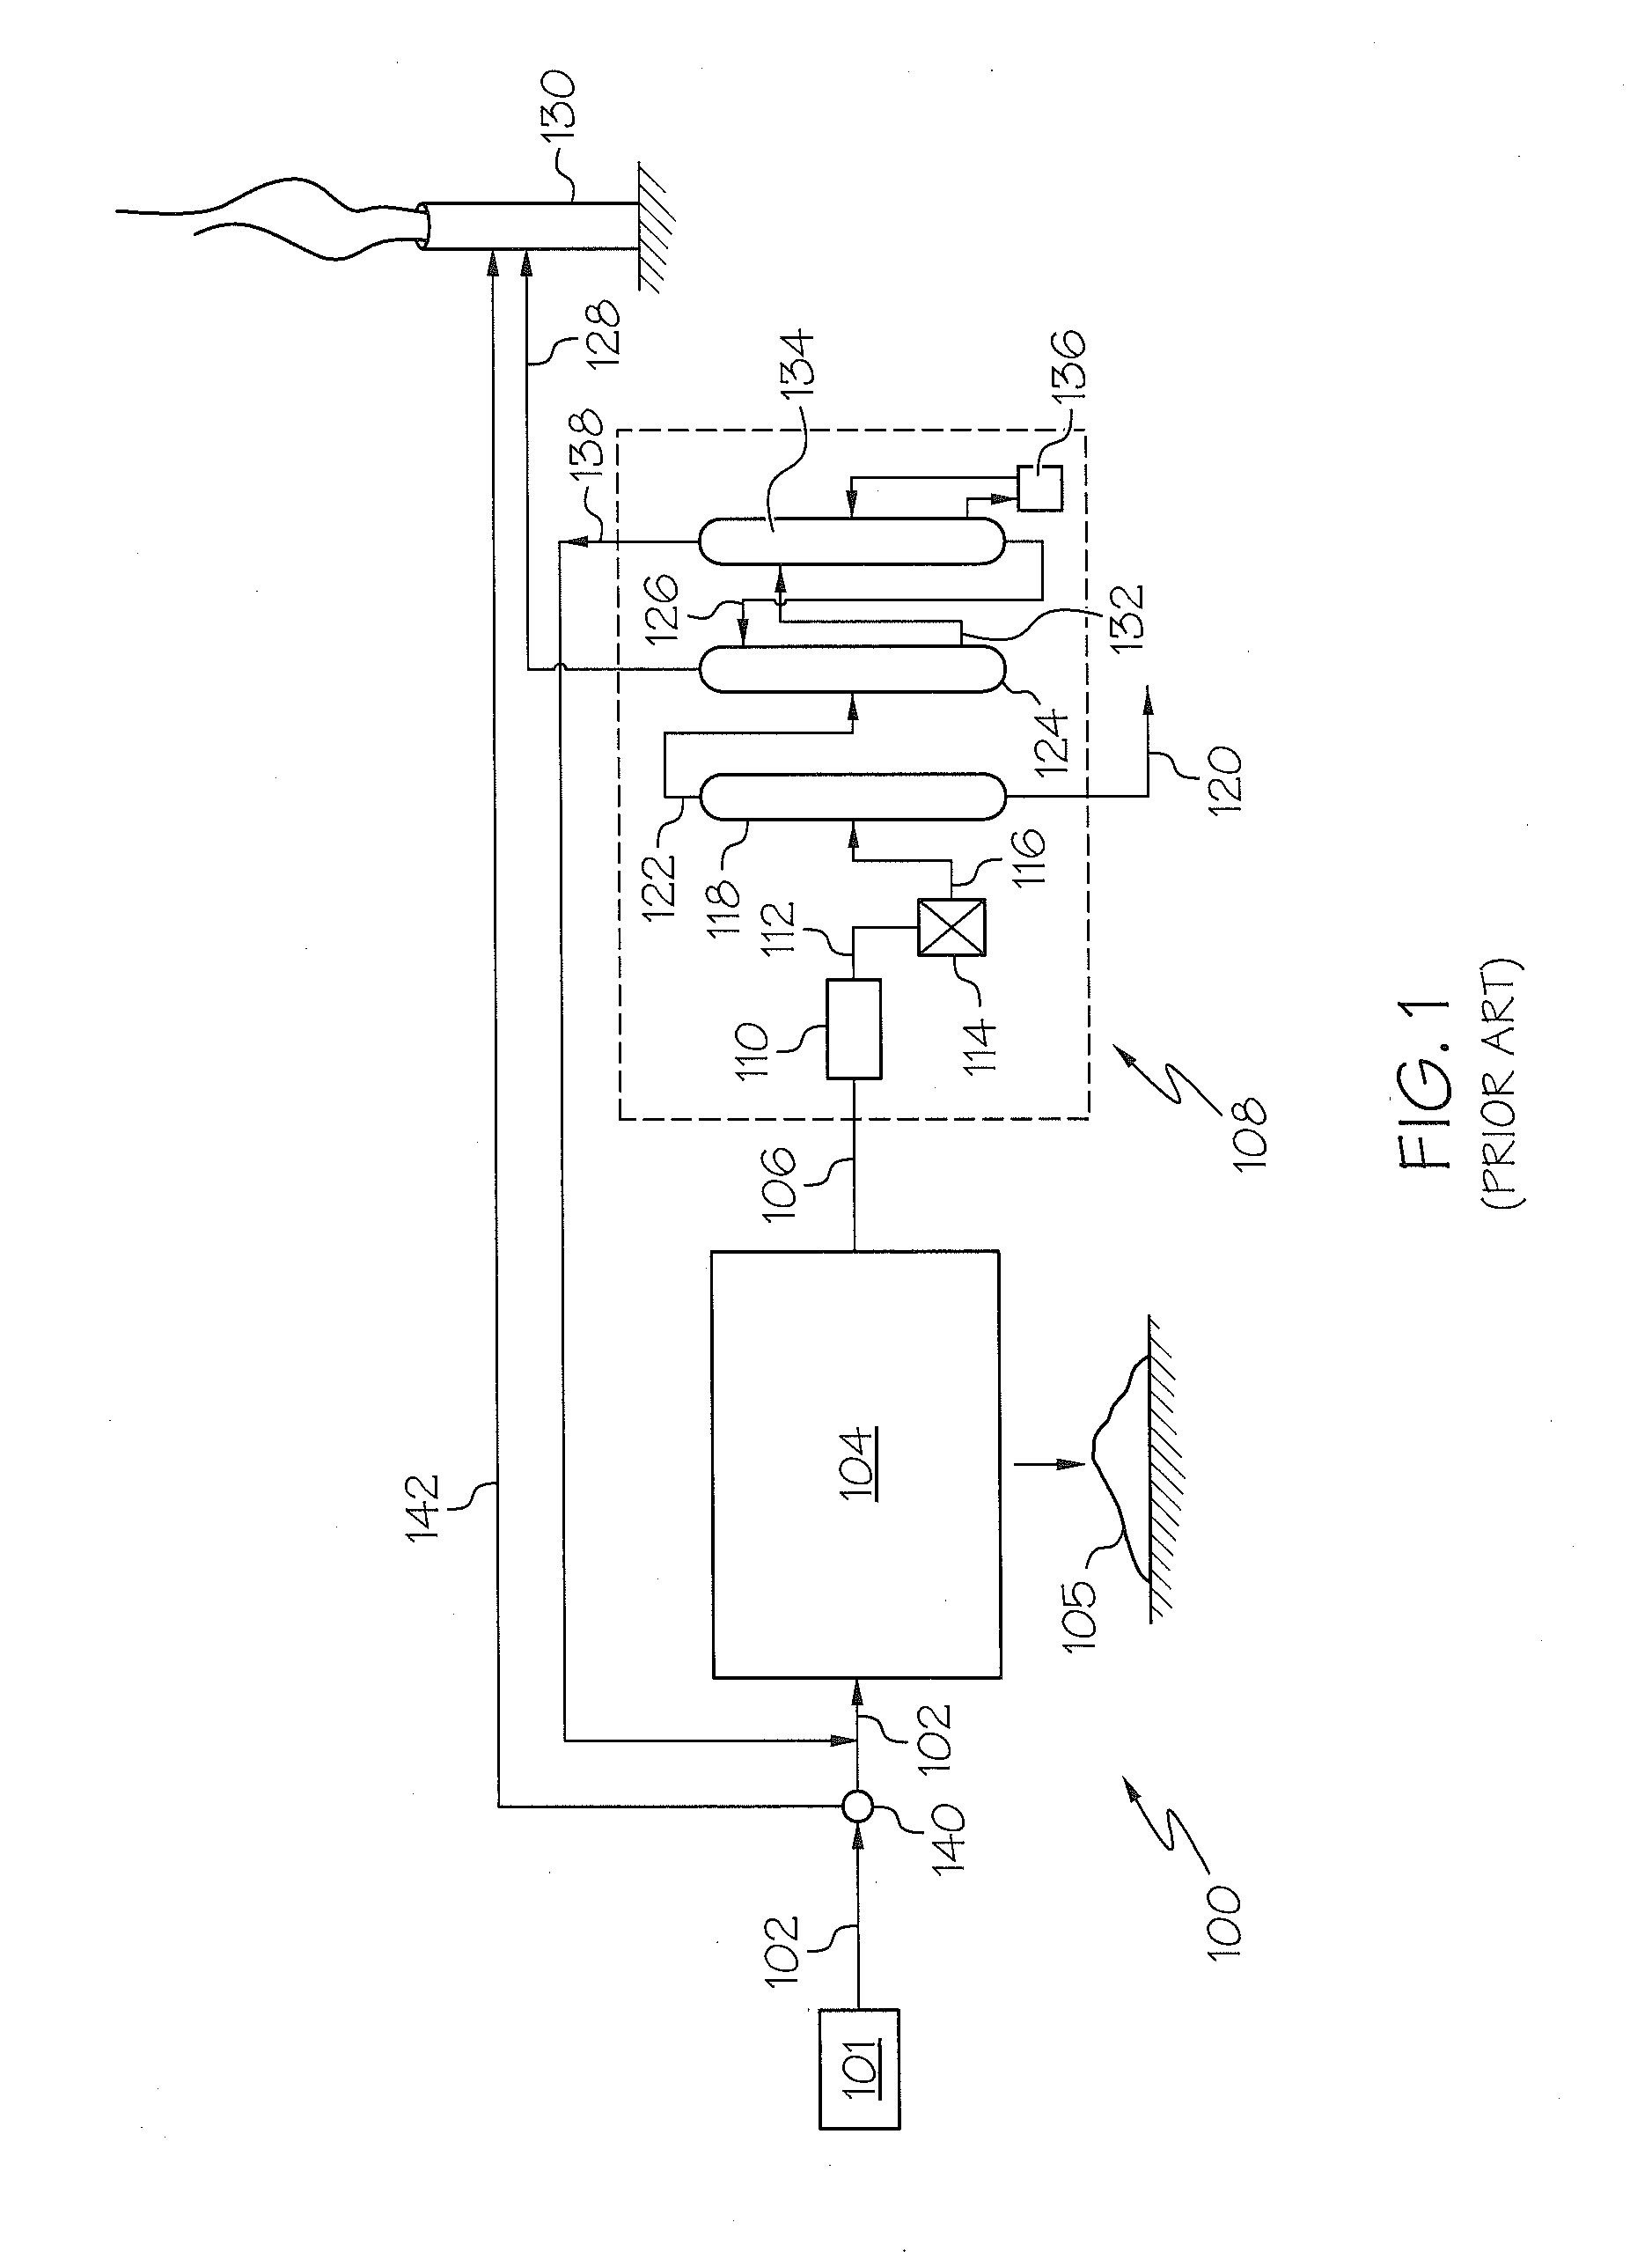 Auxiliary acid and sour gas treatment system and method